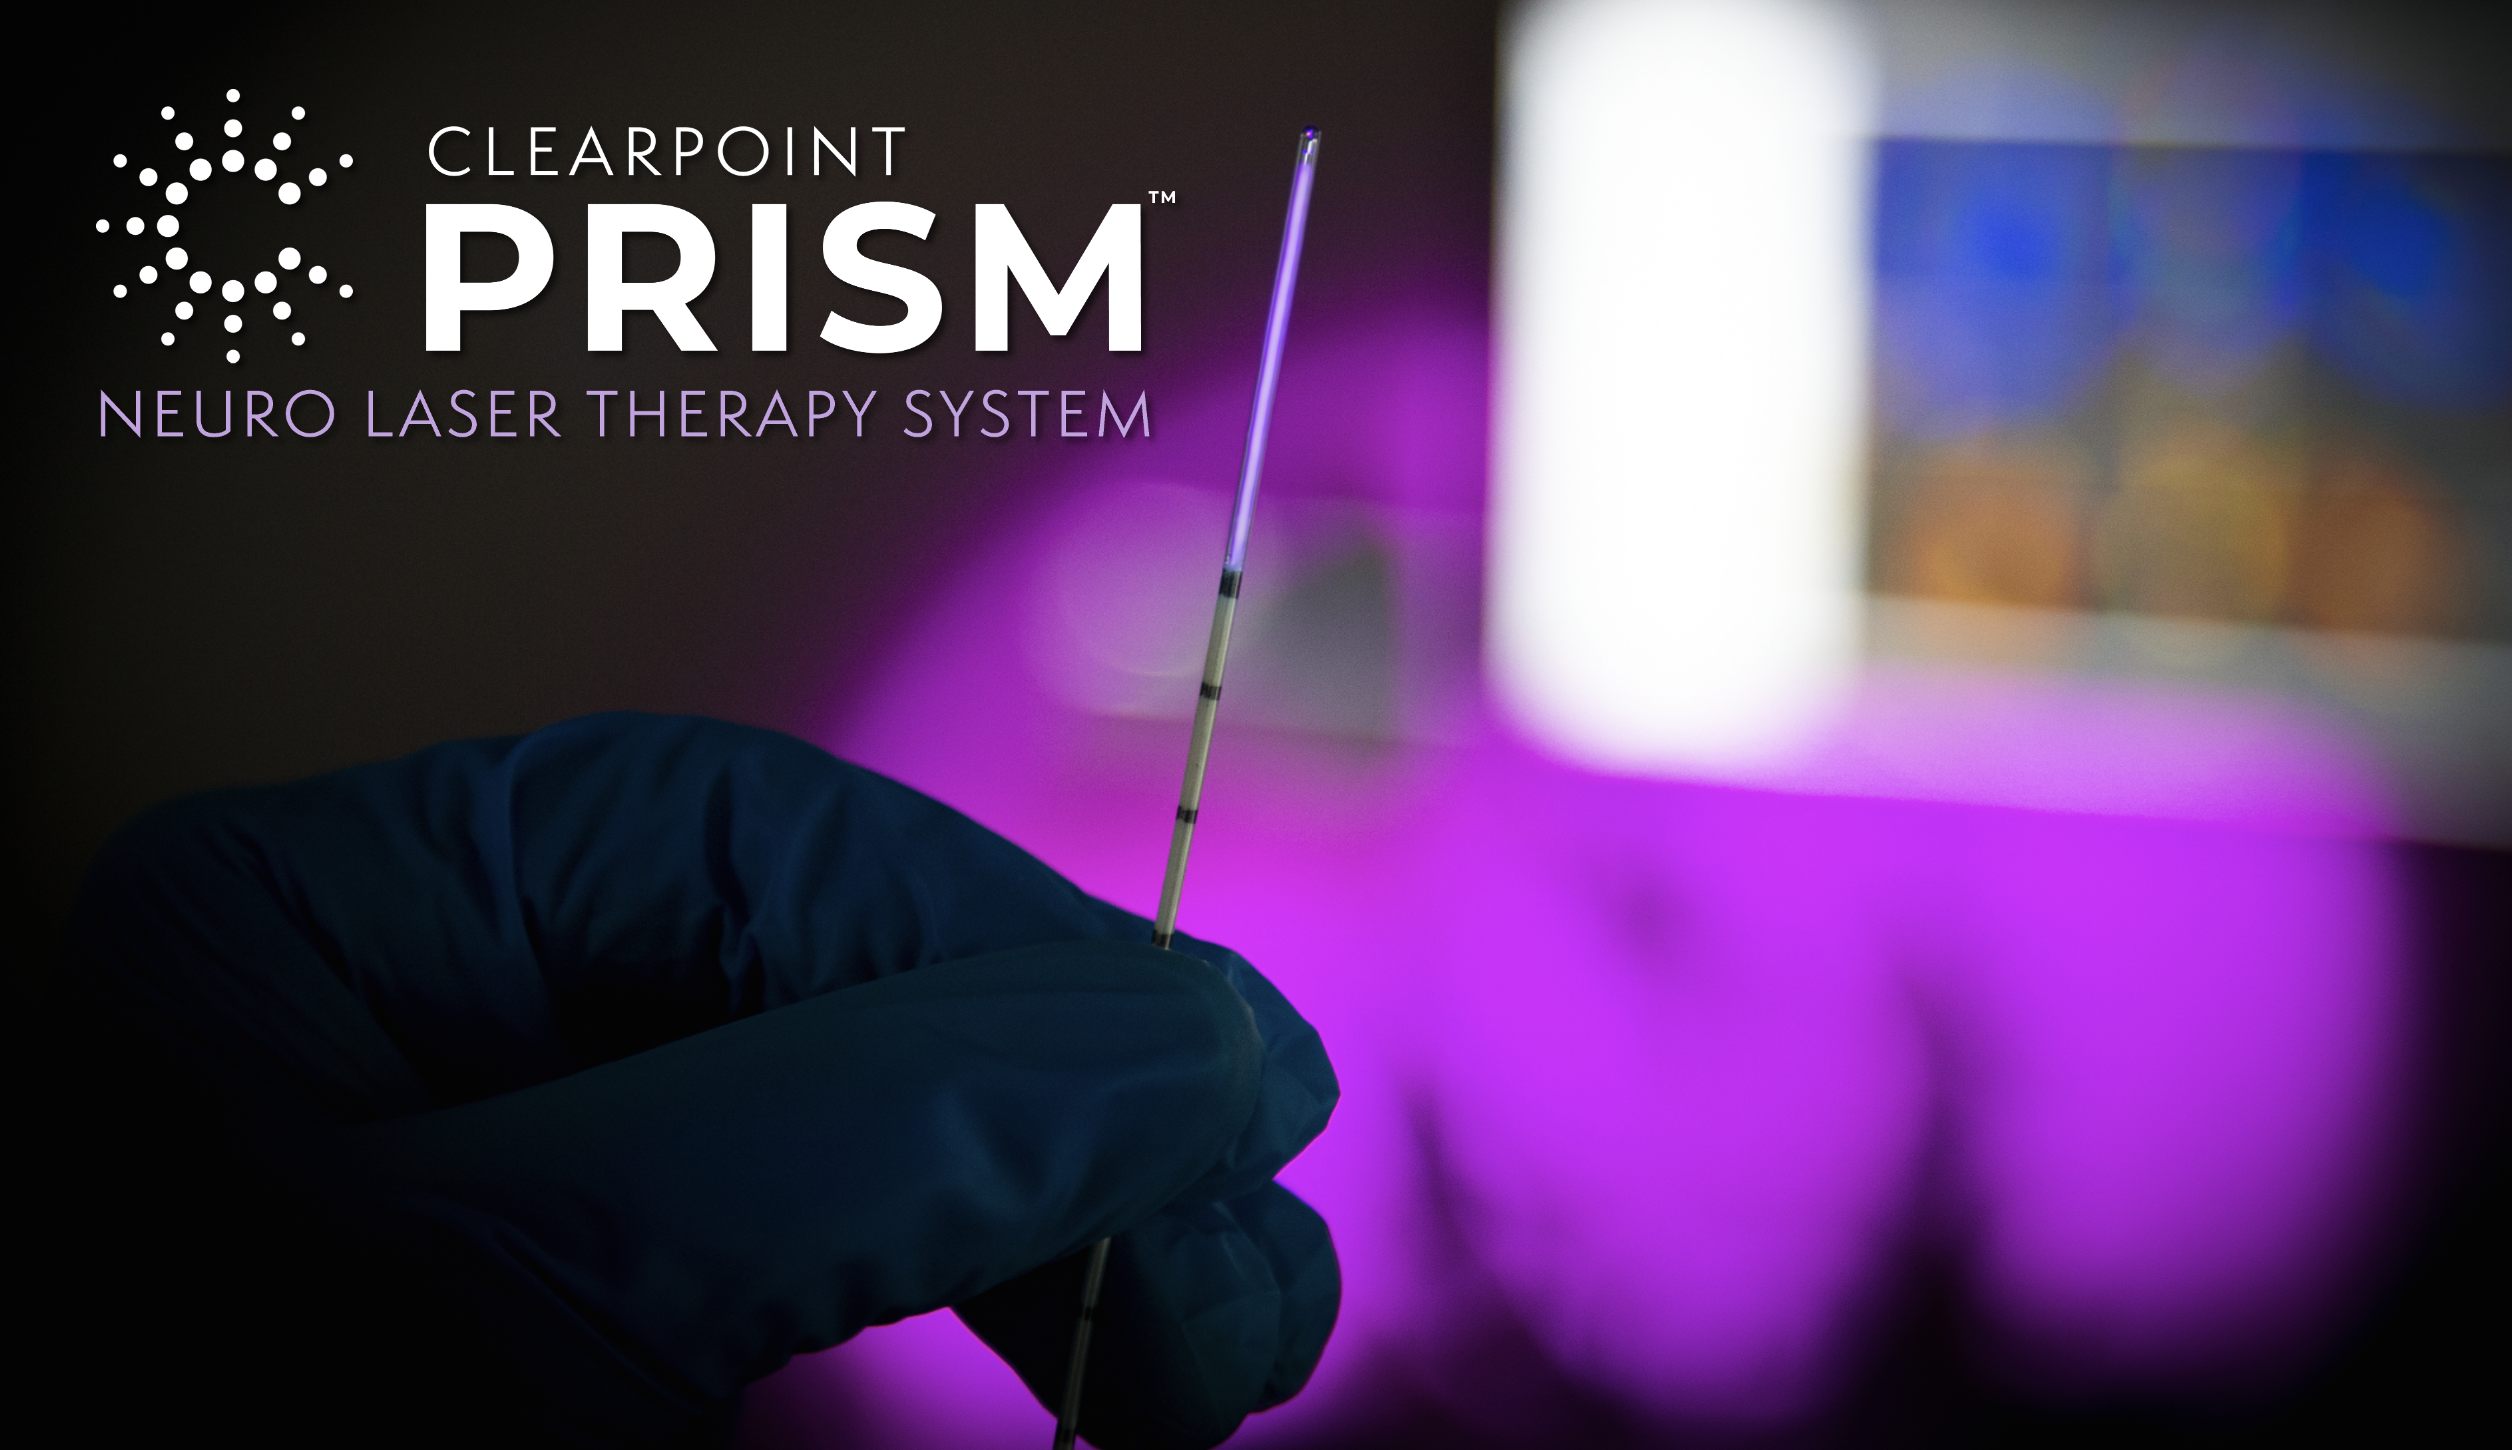 The ClearPoint Prism Neuro Laser Therapy System